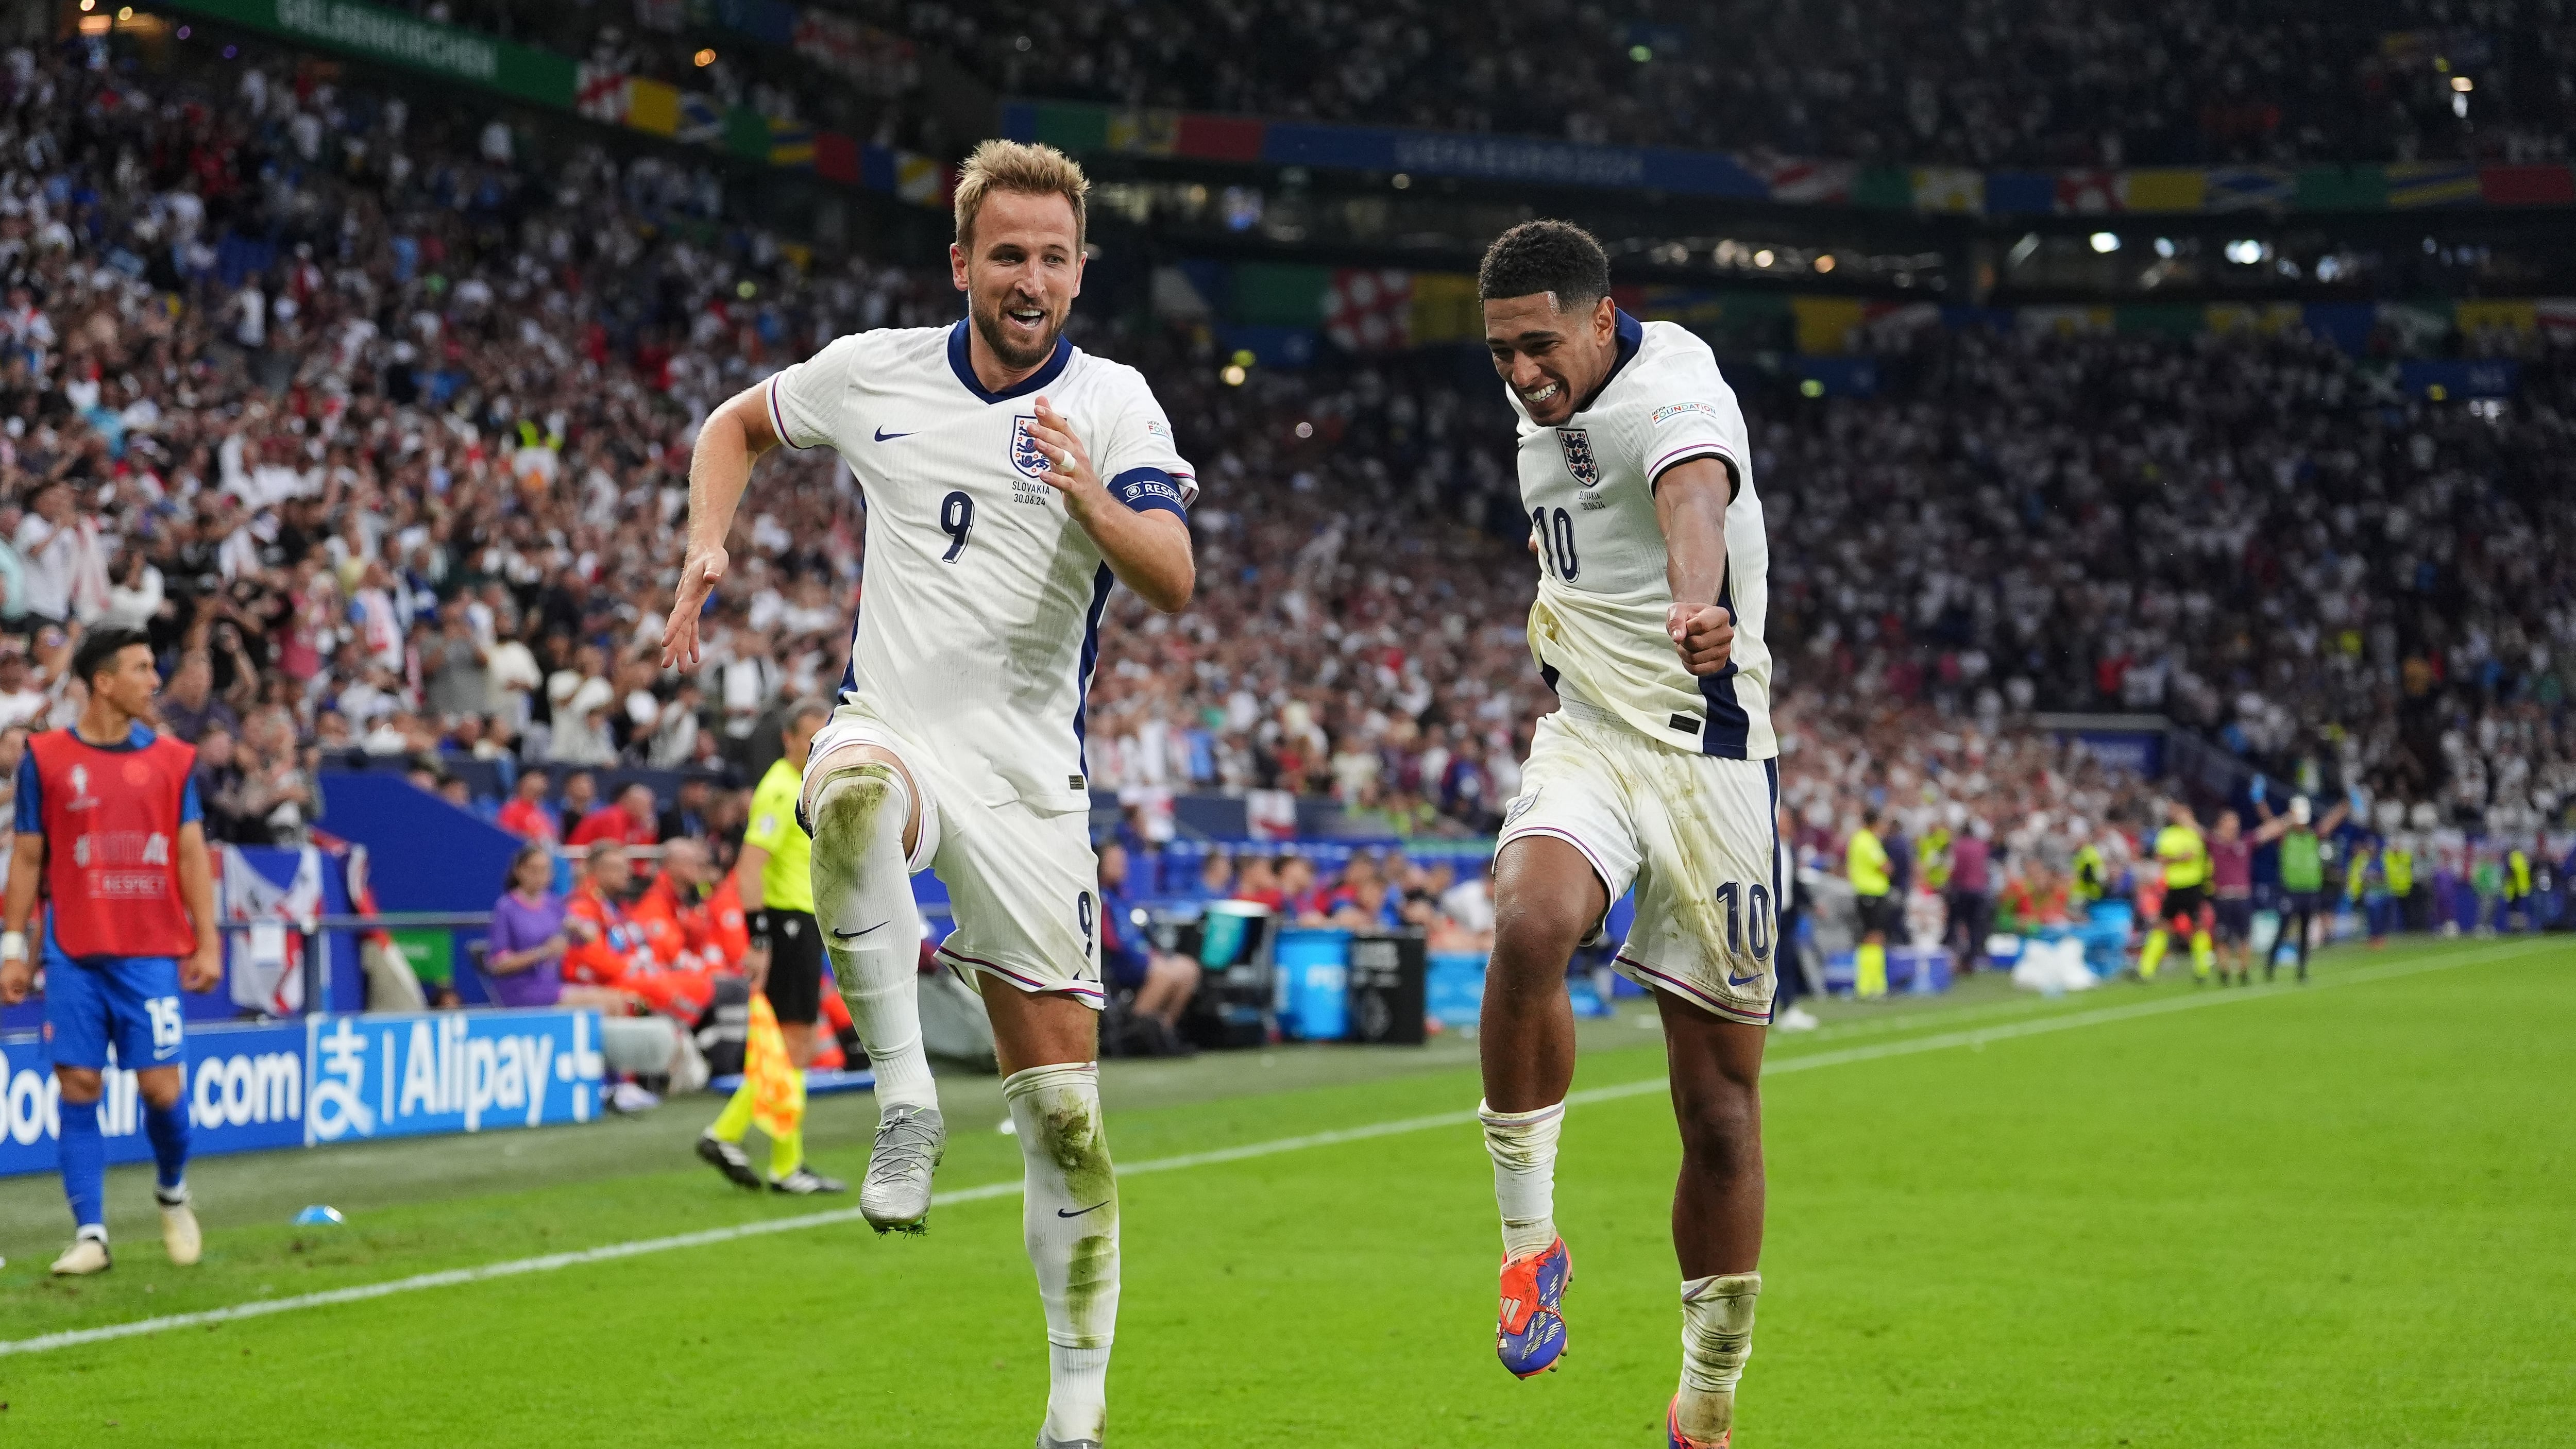 England made hard work of beating Slovakia in another worrying display